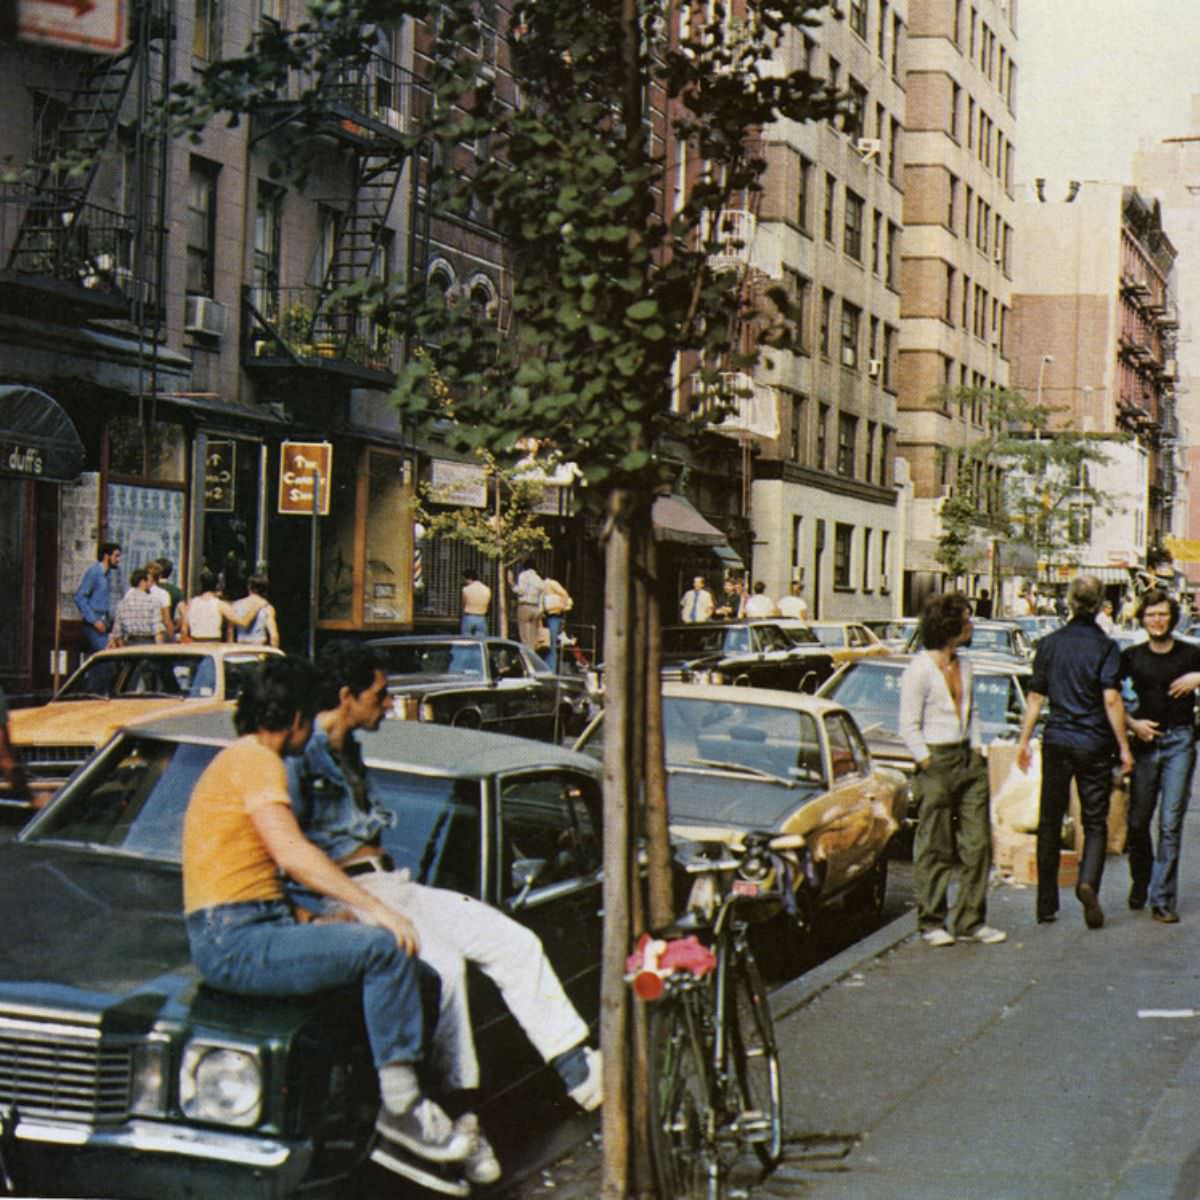 Greenwich Village, photographed by Nicolai Canetti, 1976